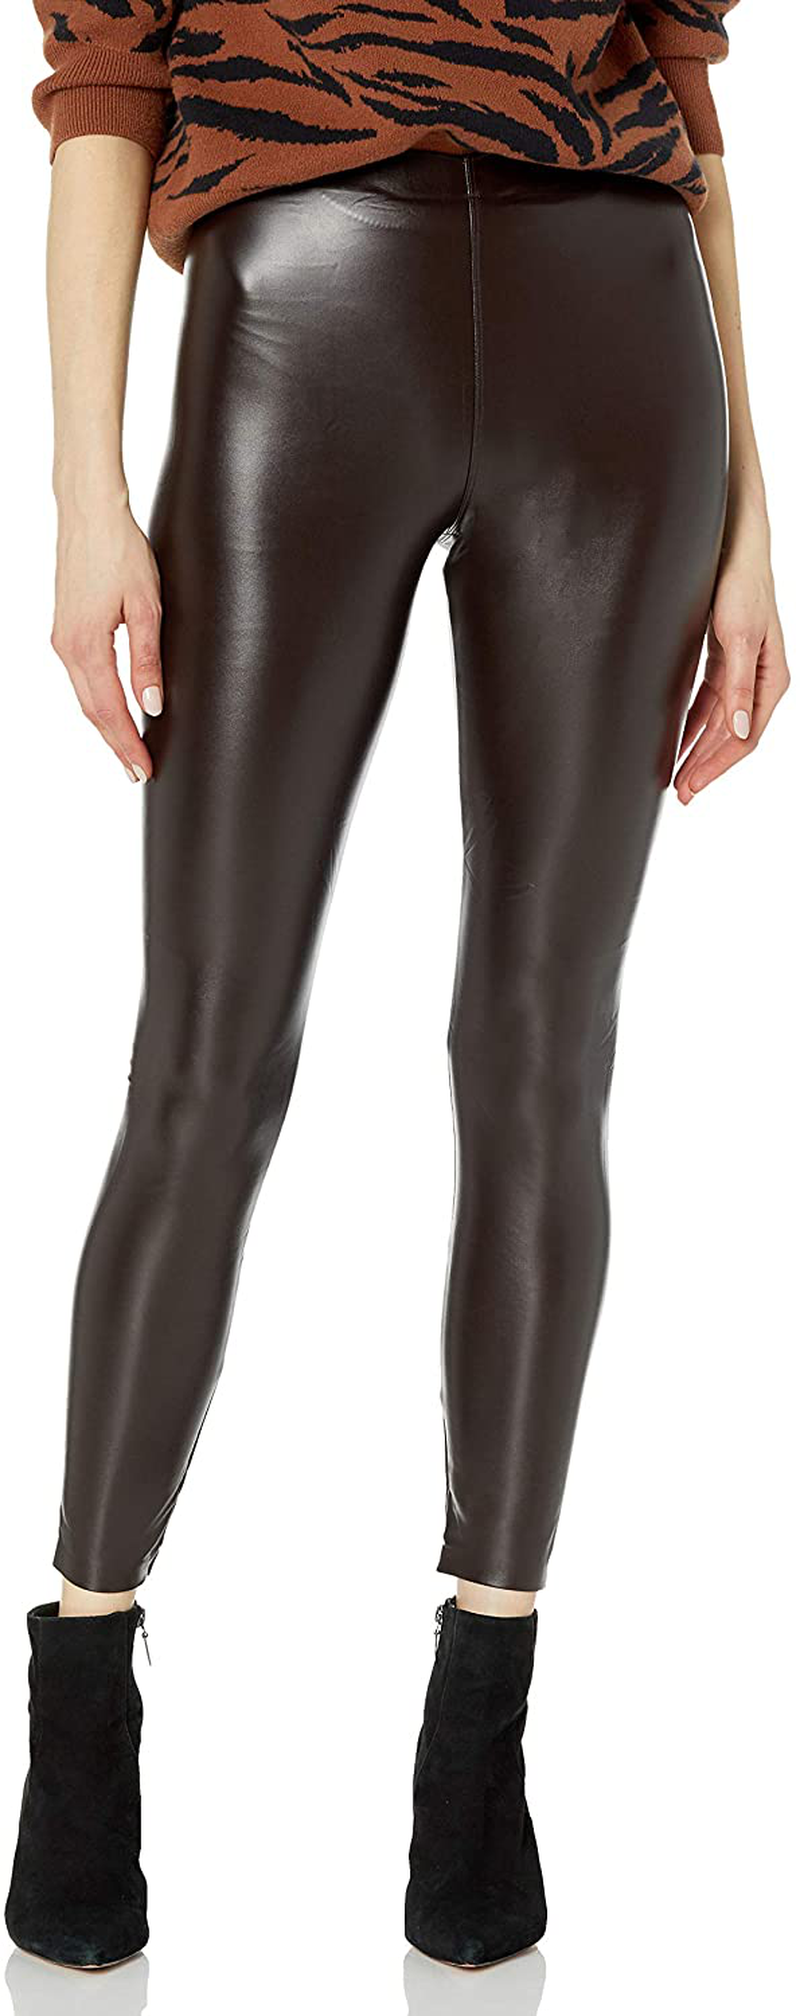 Buy Lacy Leatherette High Rise Leggings